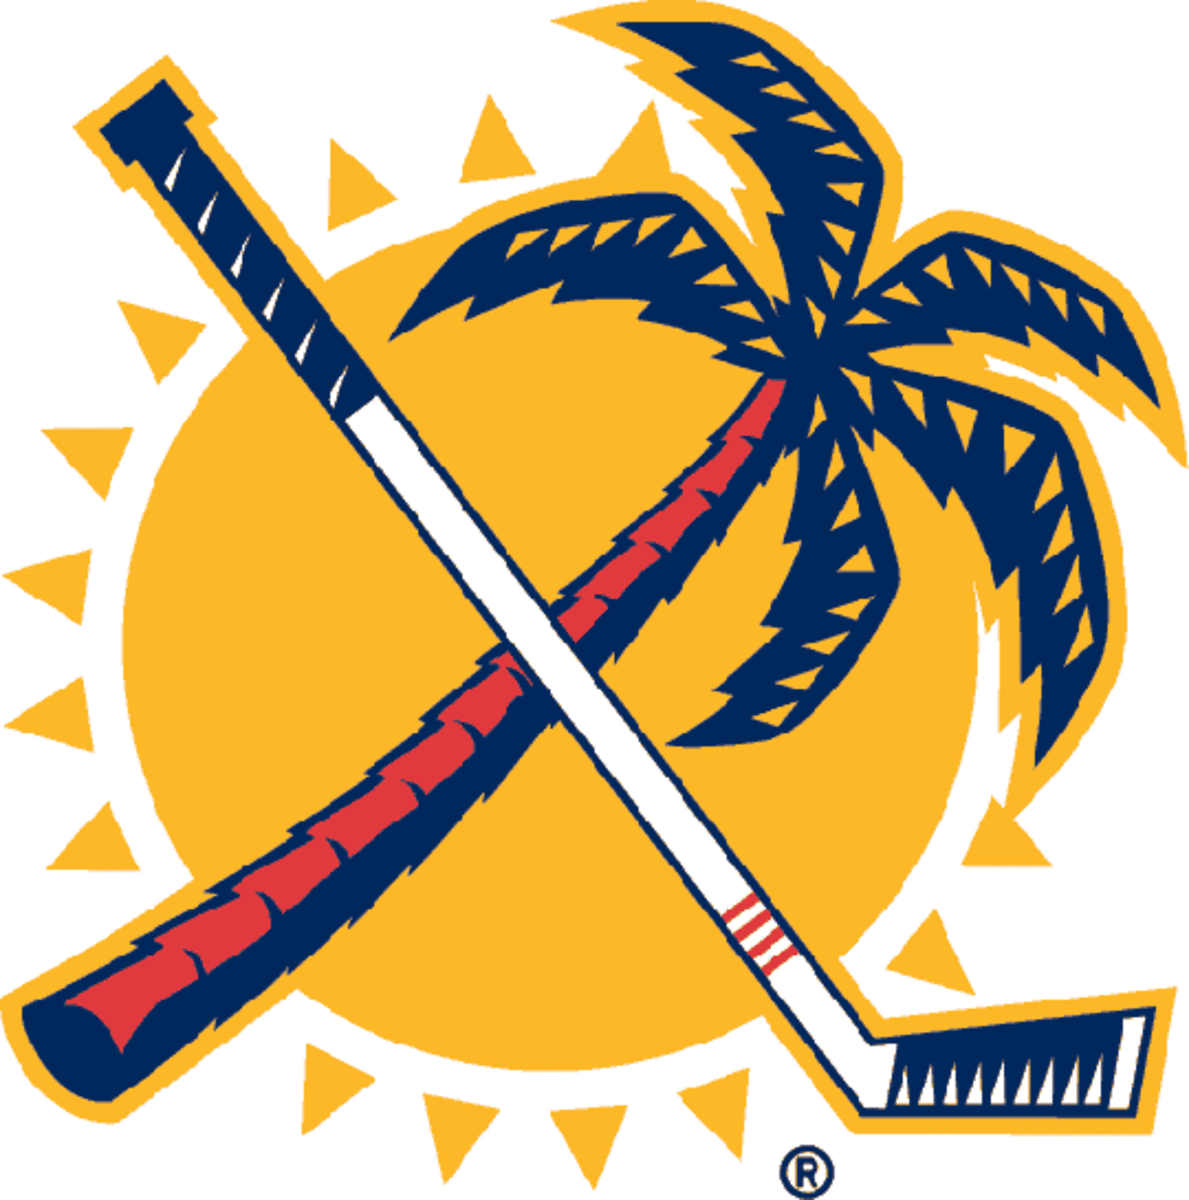 Florida Panthers Secondary Logo (1994) - A palm tree and hockey stick crossed over a sun